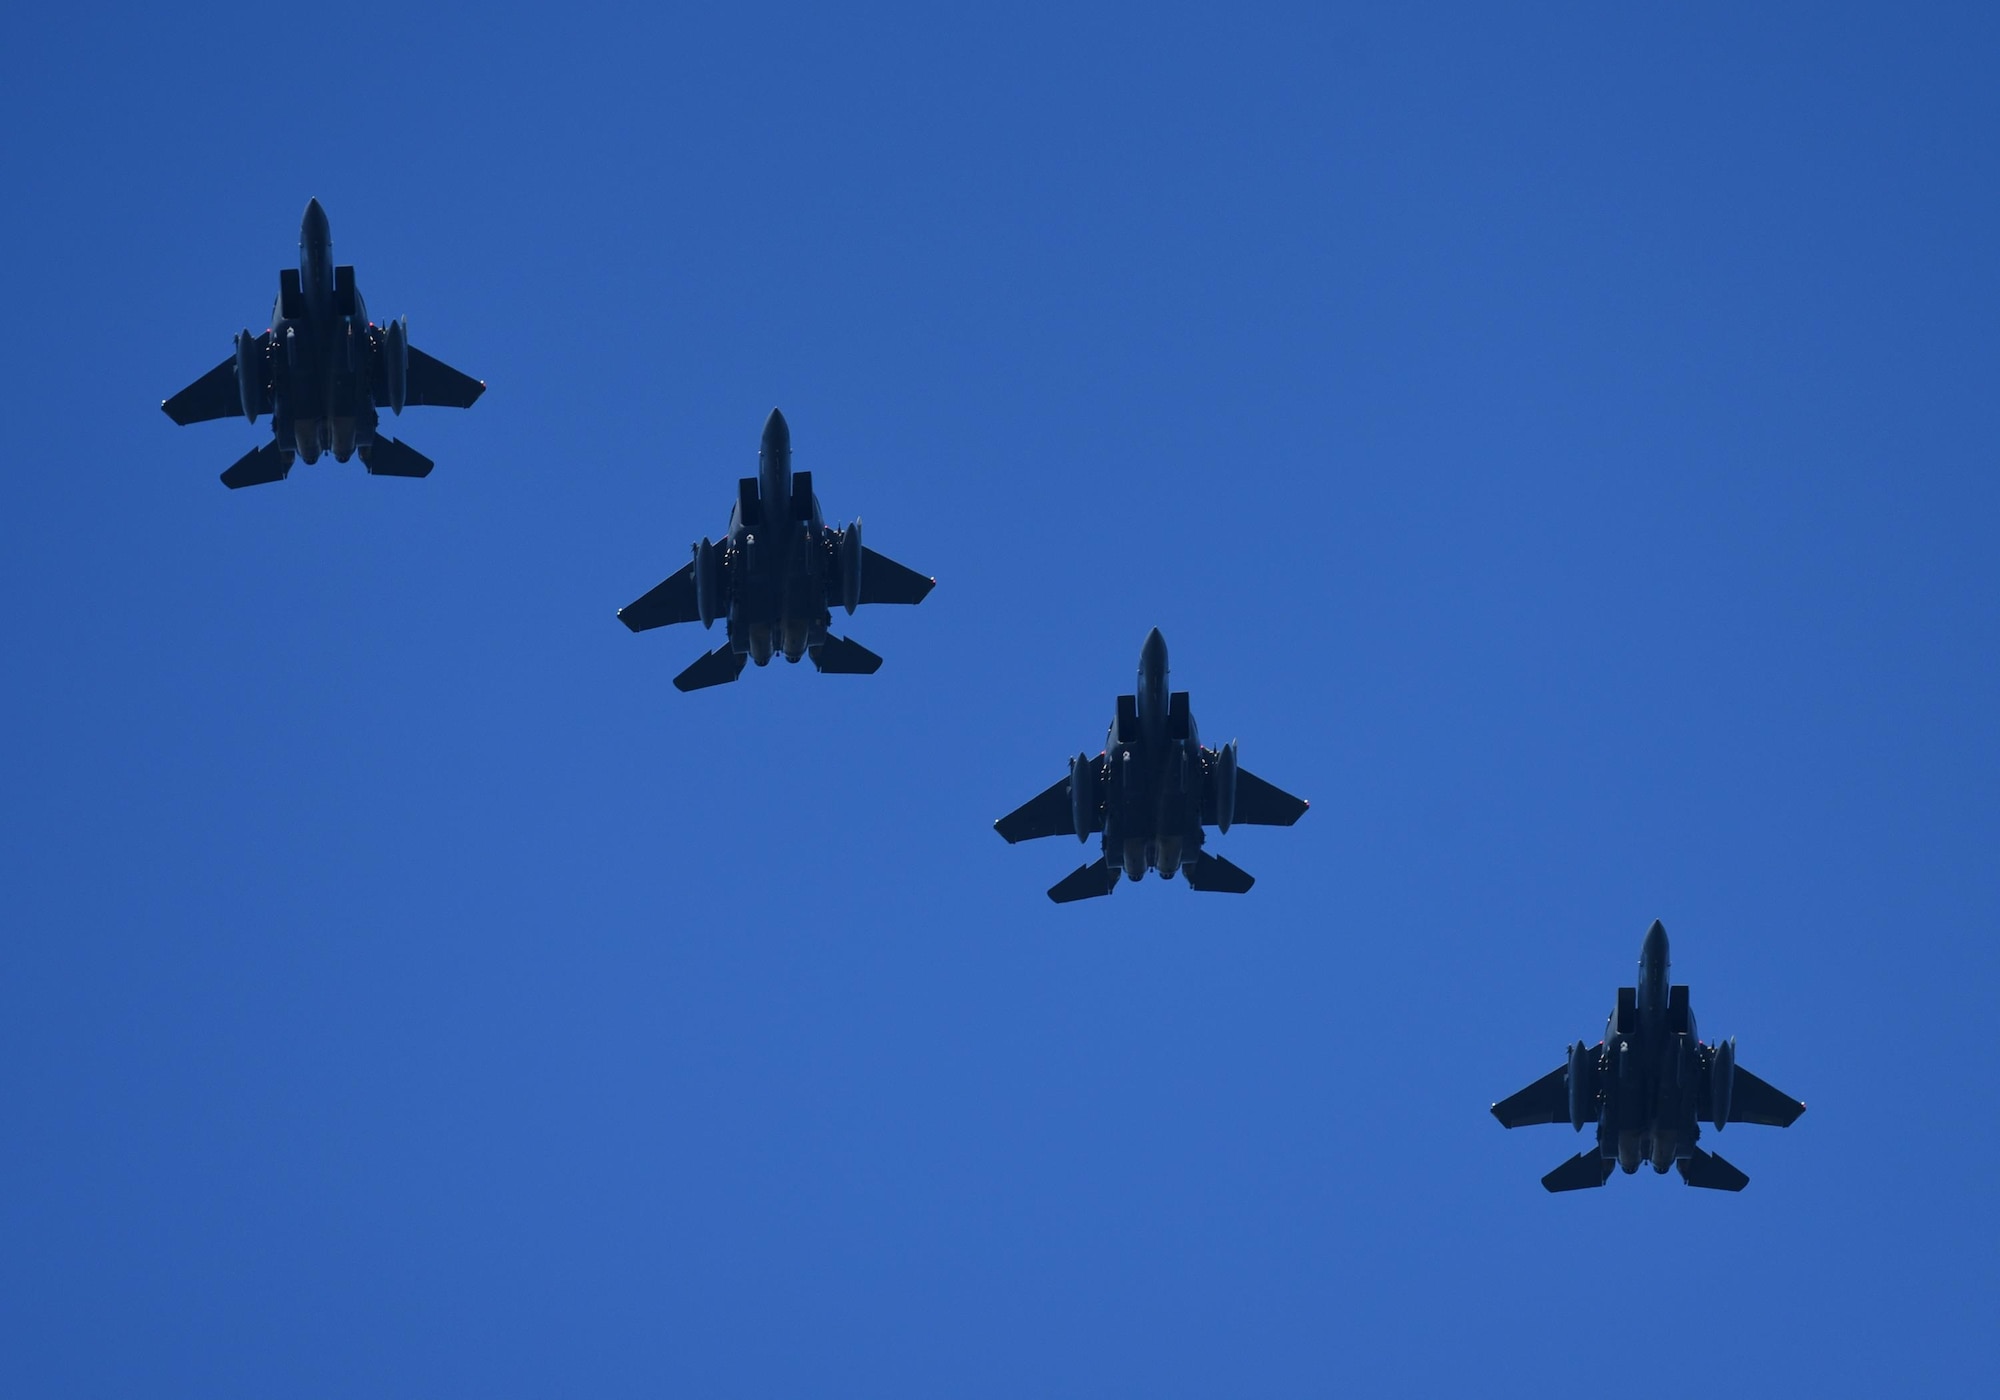 Four U.S. Air Force F-15E Strike Eagles from the 336th Fighter Wing, Mountain Home Air Force Base, Idaho, fly in formation during Checkered Flag 17-1 at Tyndall Air Force Base, Fla., Dec. 16, 2016. More than 300 Airmen from Mountain Home AFB deployed along with 16 F-15Es to participate in the large-force exercise, integrating with other fourth-generation aircraft as well as the F-22 Raptor and the F-35 Lightning II. (U.S. Air Force photo by Staff Sergeant Alex Fox Echols III/Released)